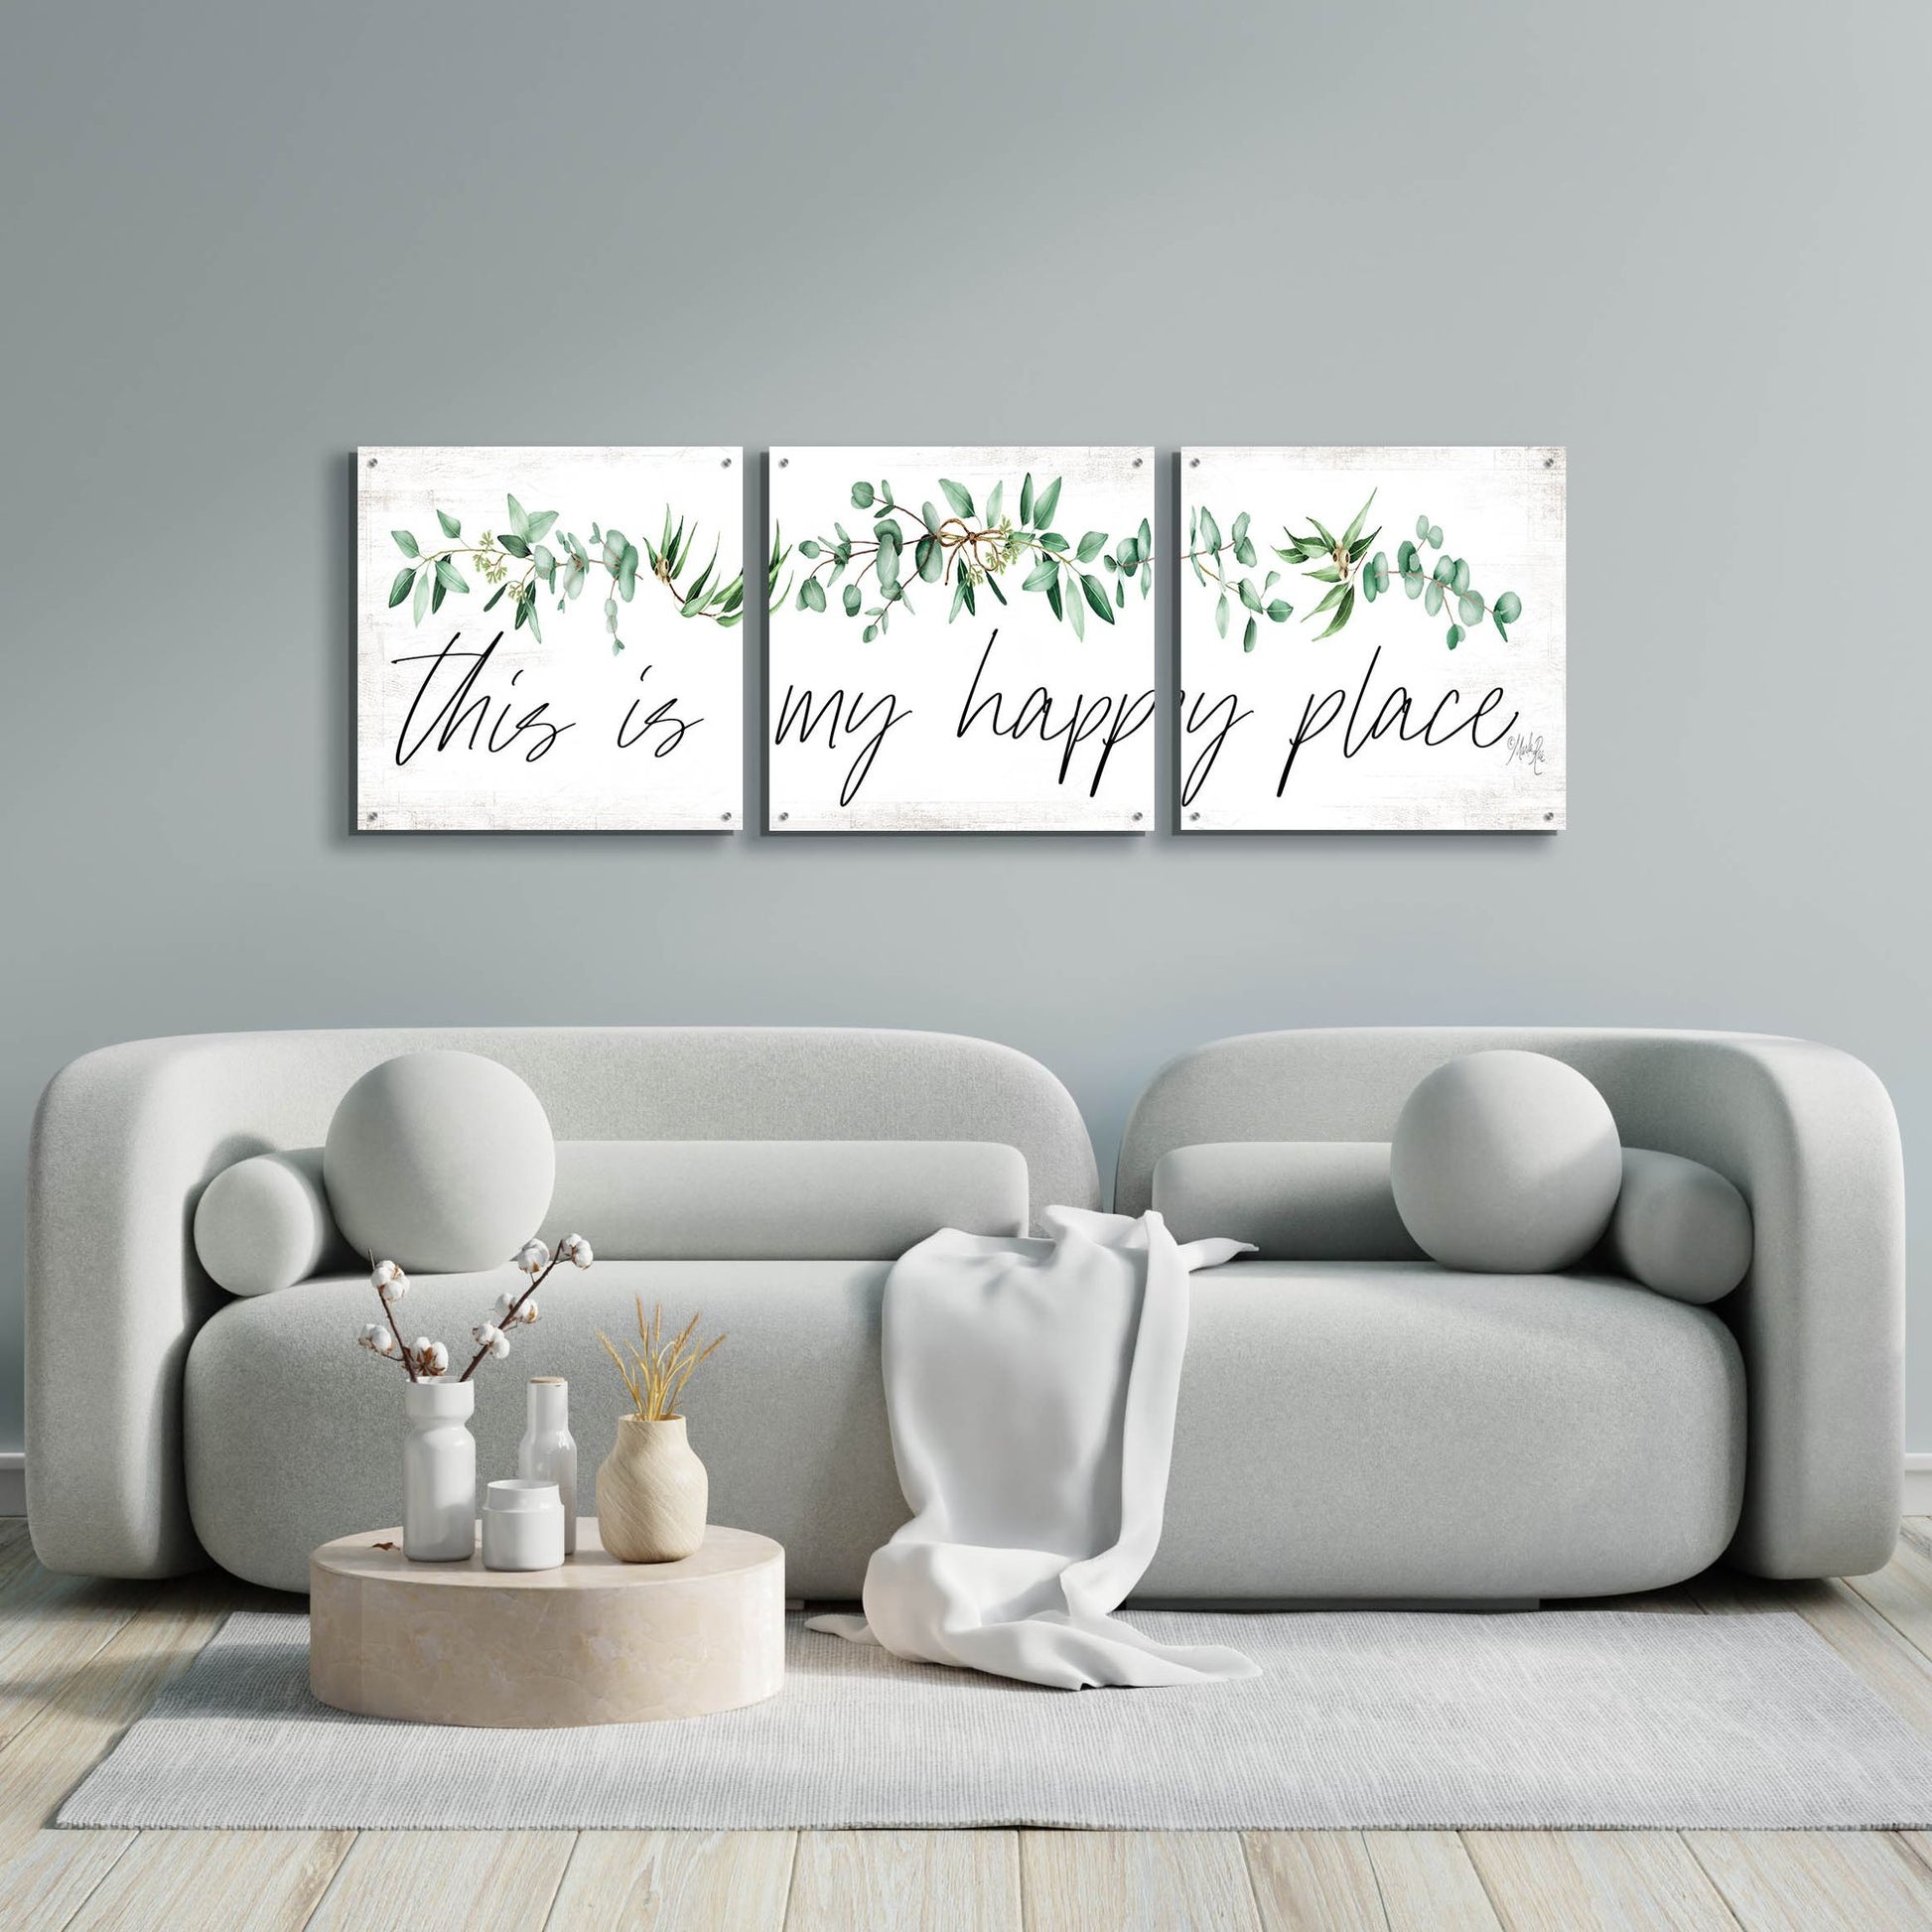 Epic Art 'This is My Happy Place' by Marla Rae, Acrylic Glass Wall Art, 3 Piece Set,72x24